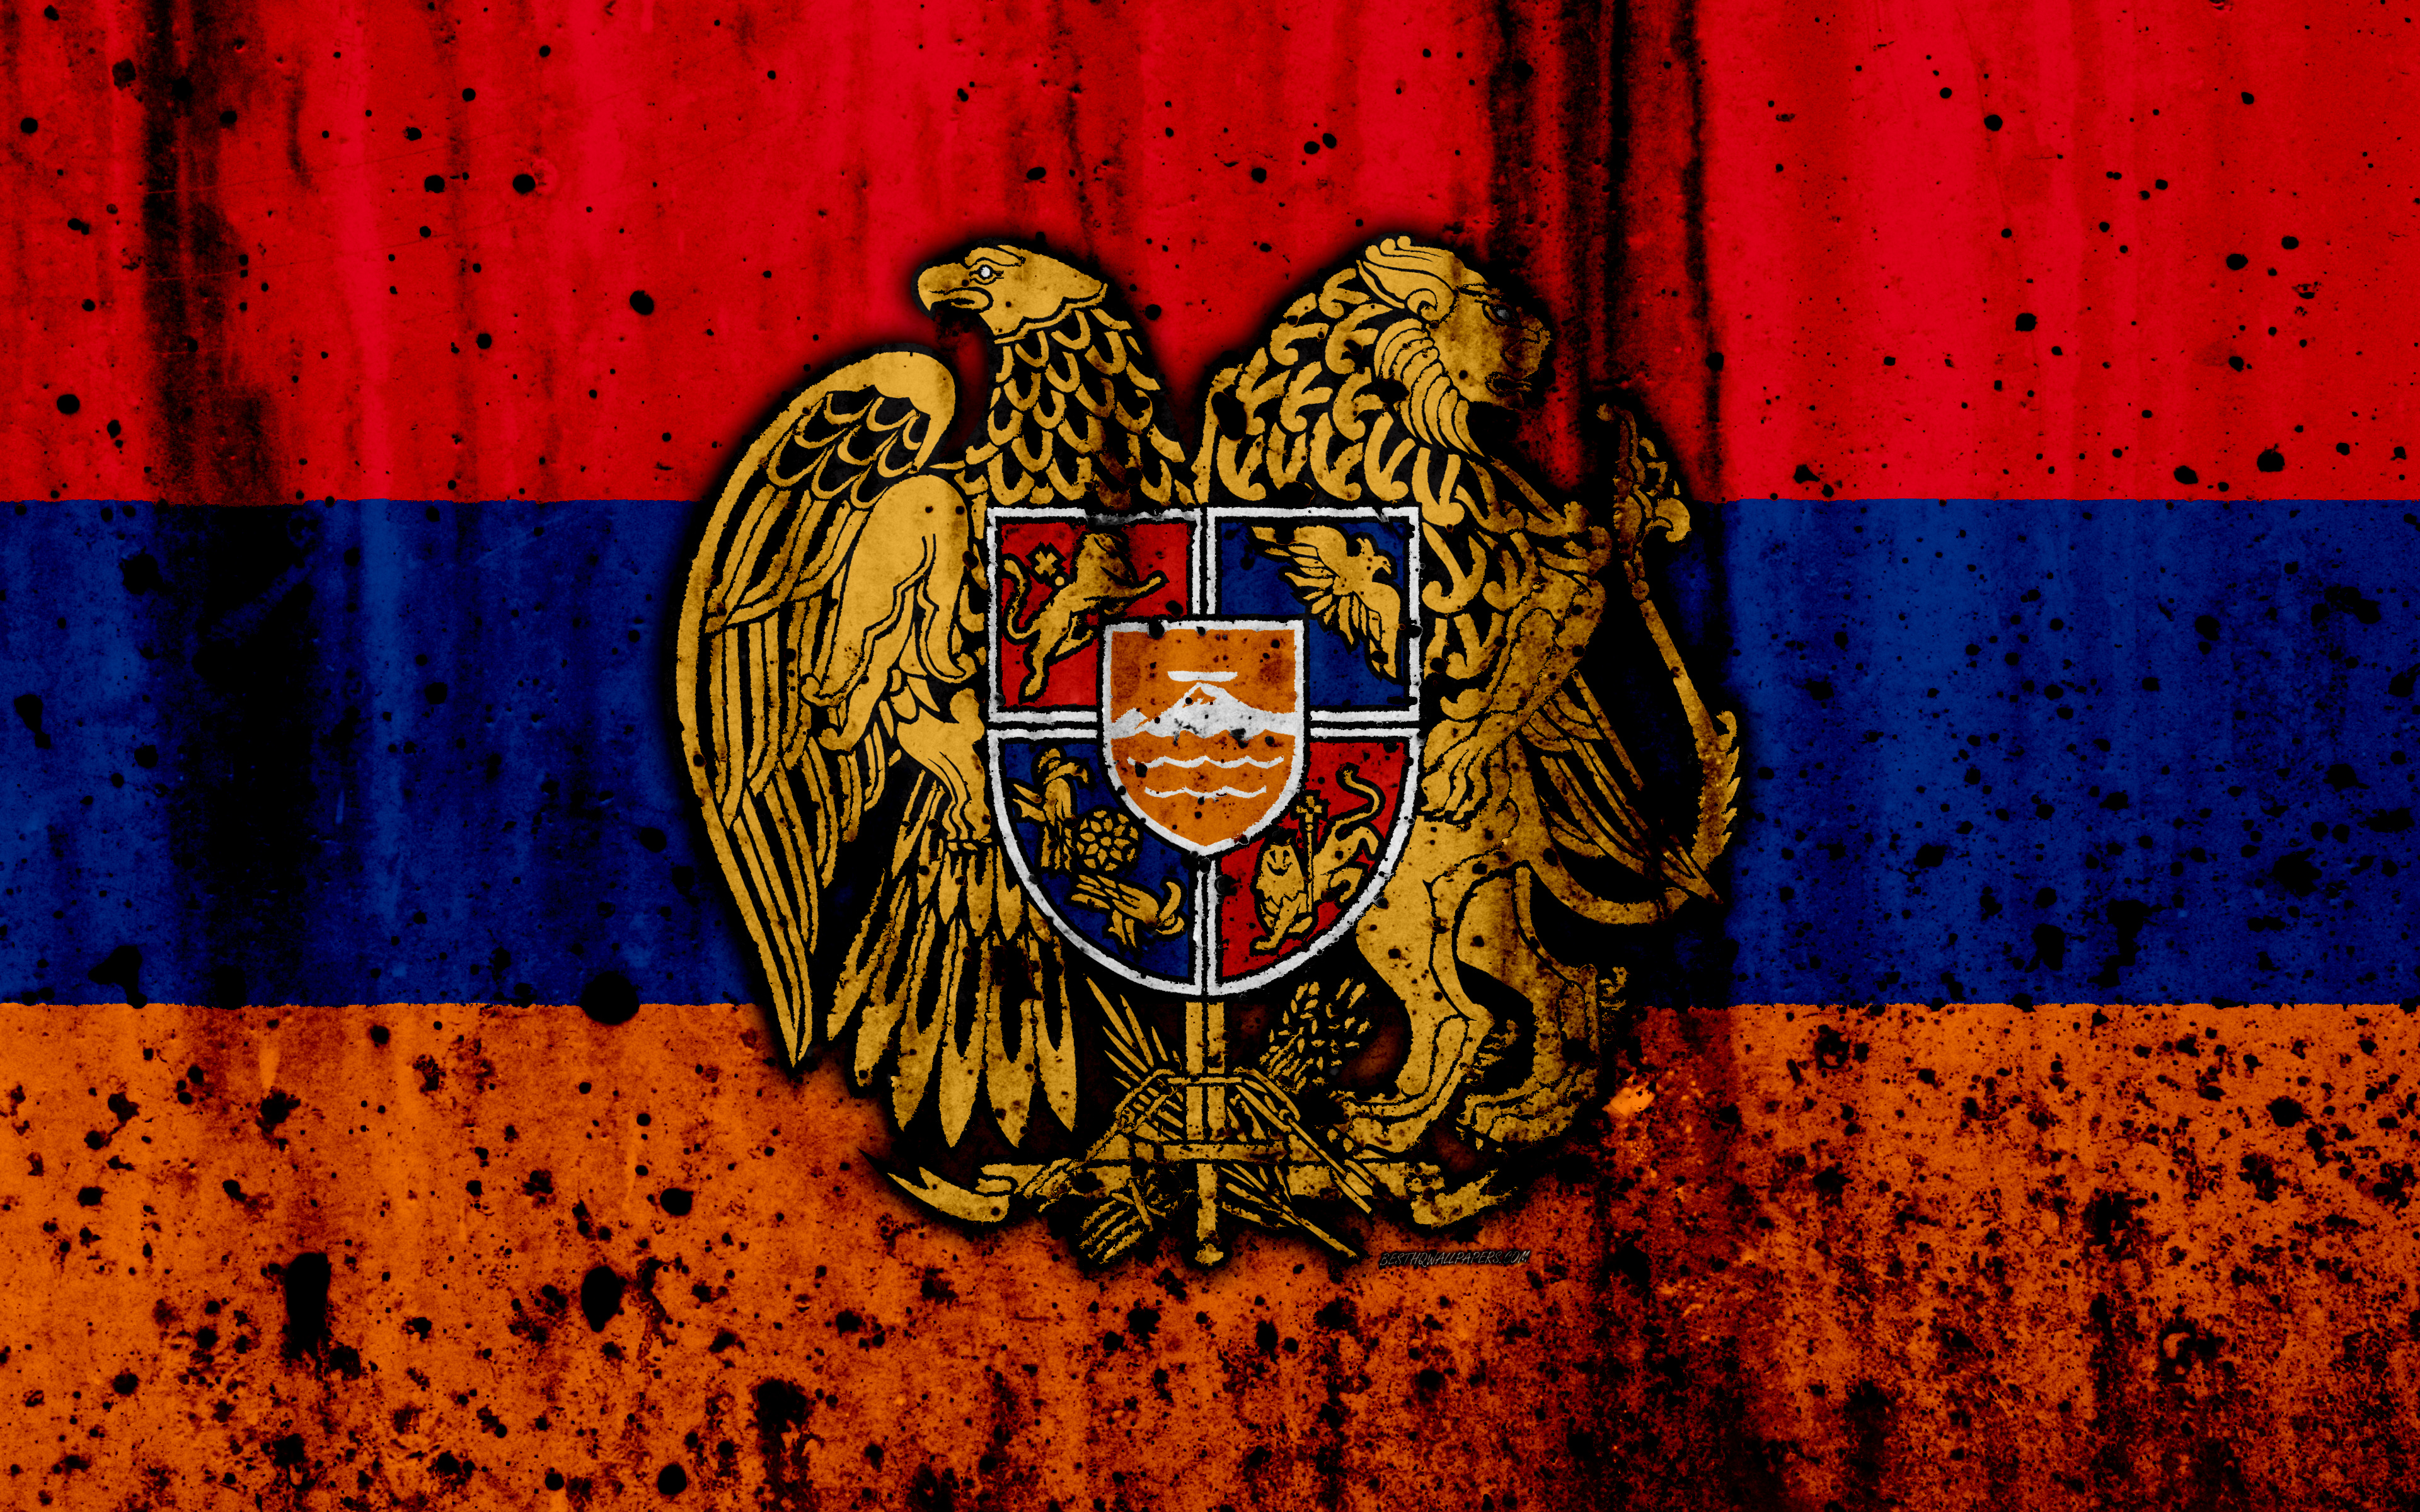 Download wallpaper Armenian flag, 4k, grunge, Asia, flag of Armenia, national symbols, Armenia, Armenian coat of arms, national flag for desktop with resolution 3840x2400. High Quality HD picture wallpaper